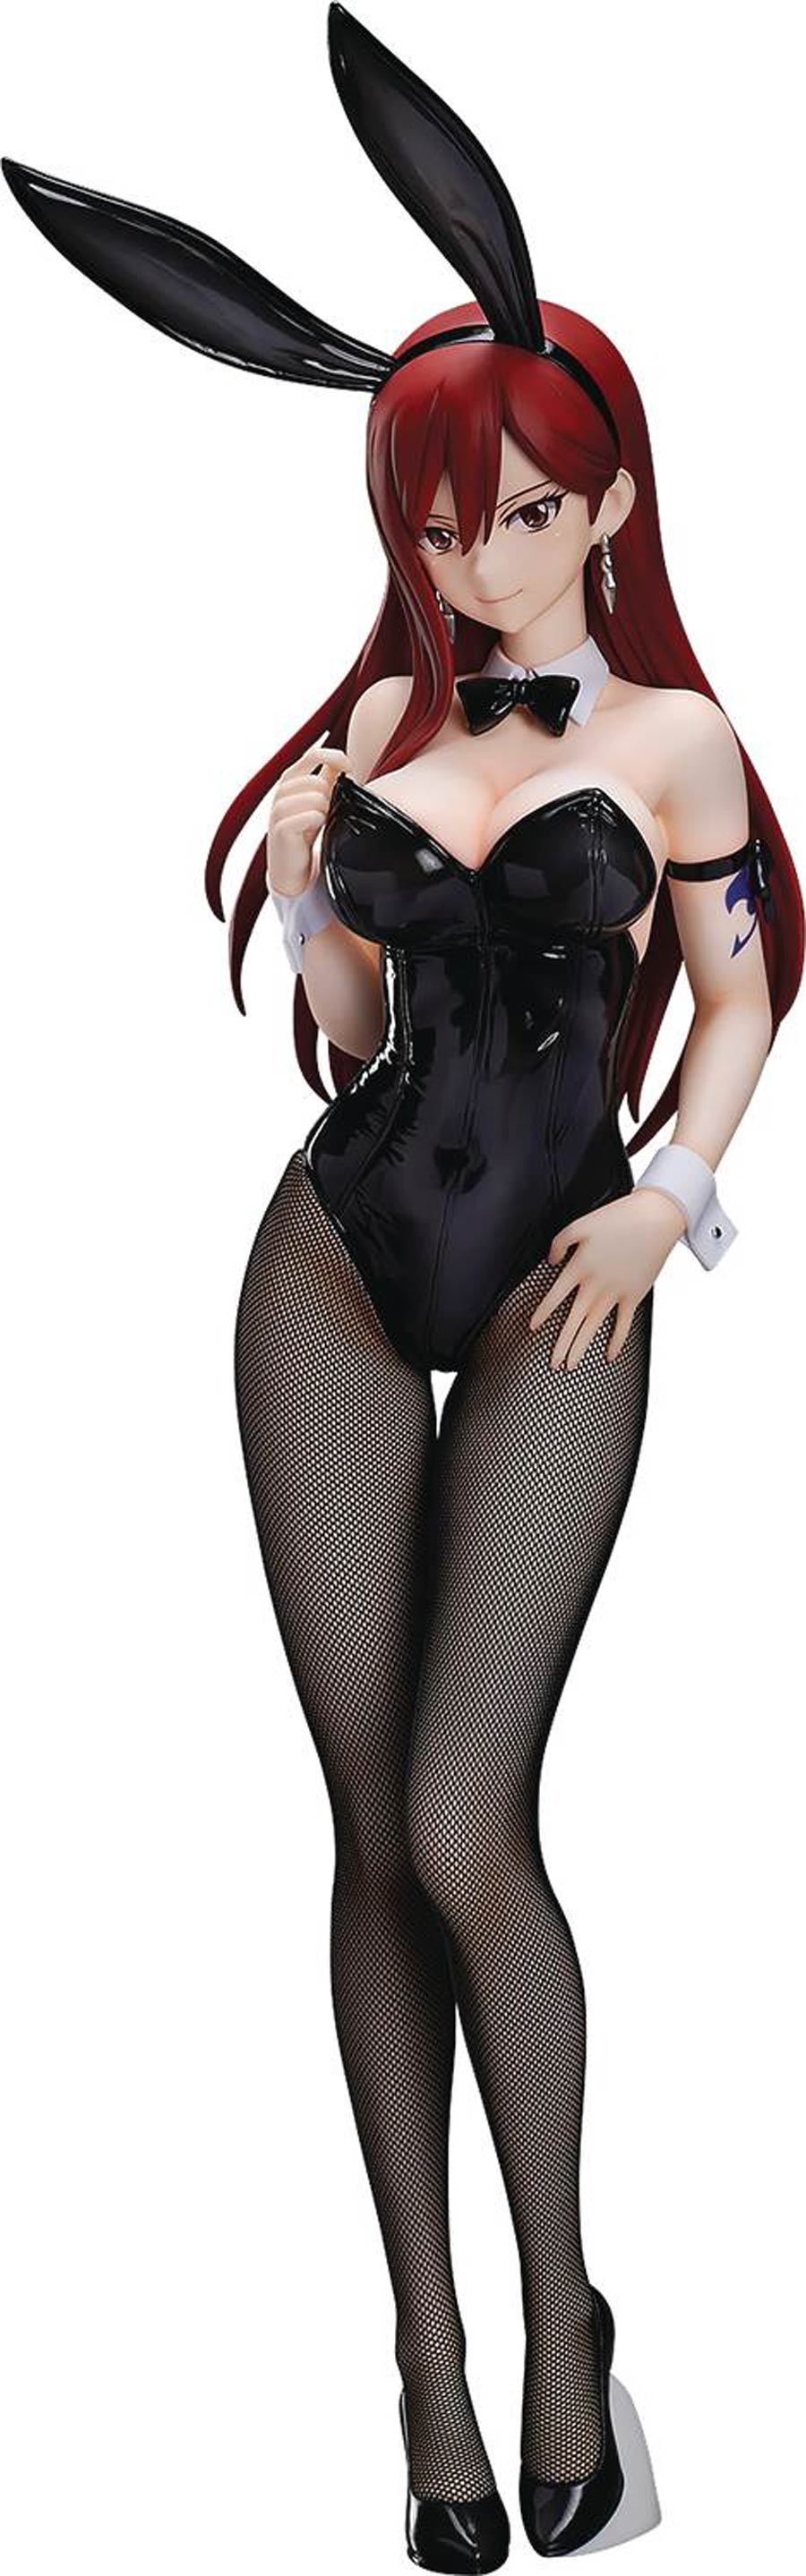 Fairy Tail Erza Scarlet Bunny Girl 1/4 Scale PVC Figure